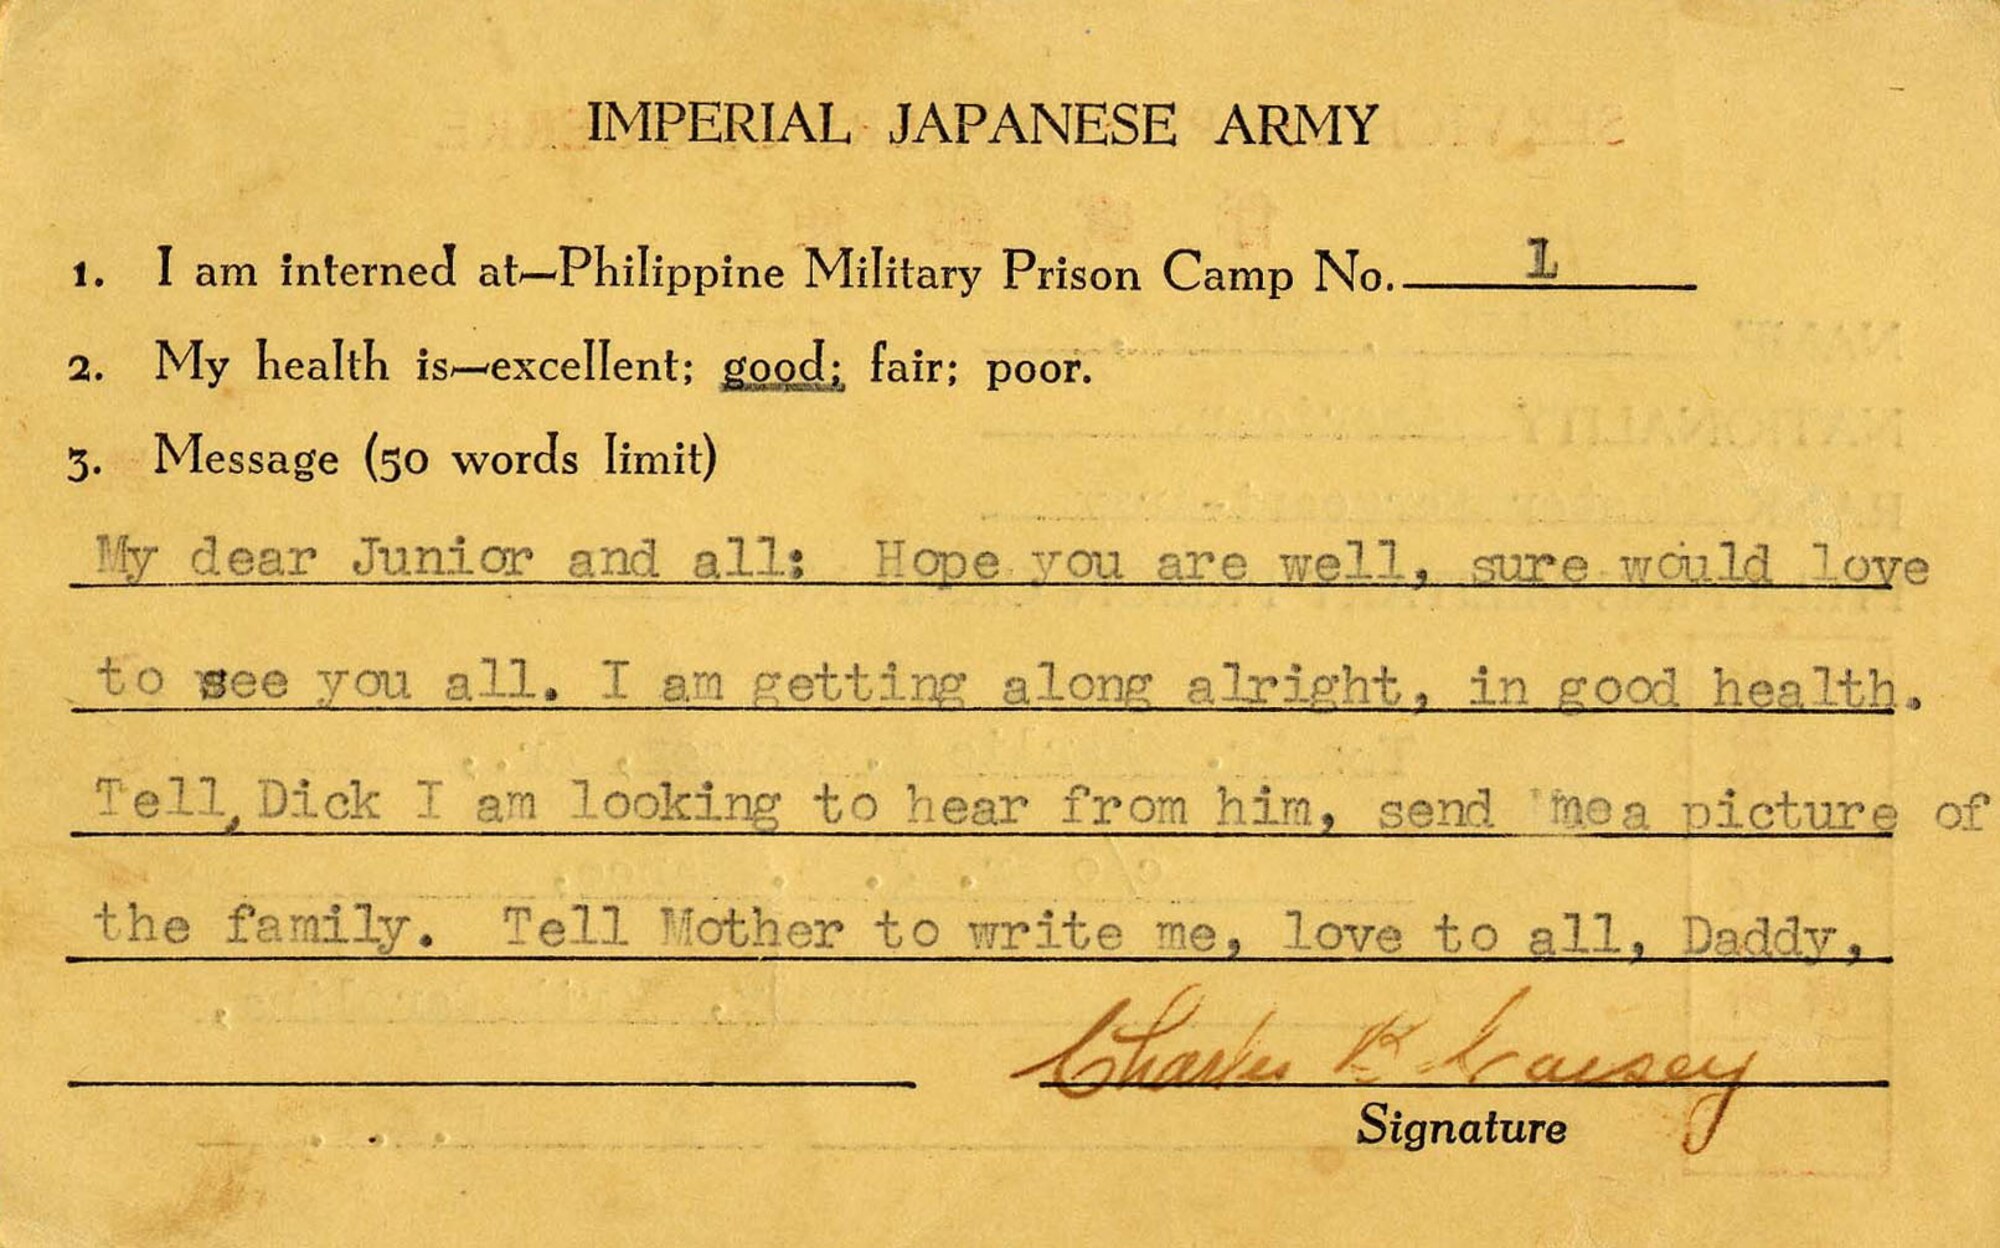 Copy of the only correspondence Causey’s family received from him after his capture. Philippine Military Prison Camp No. 1 was at Cabanatuan. The next letter the family received about Causey was from the War Department to notify them of his loss on the "Arisan Maru." (U.S. Air Force photo)